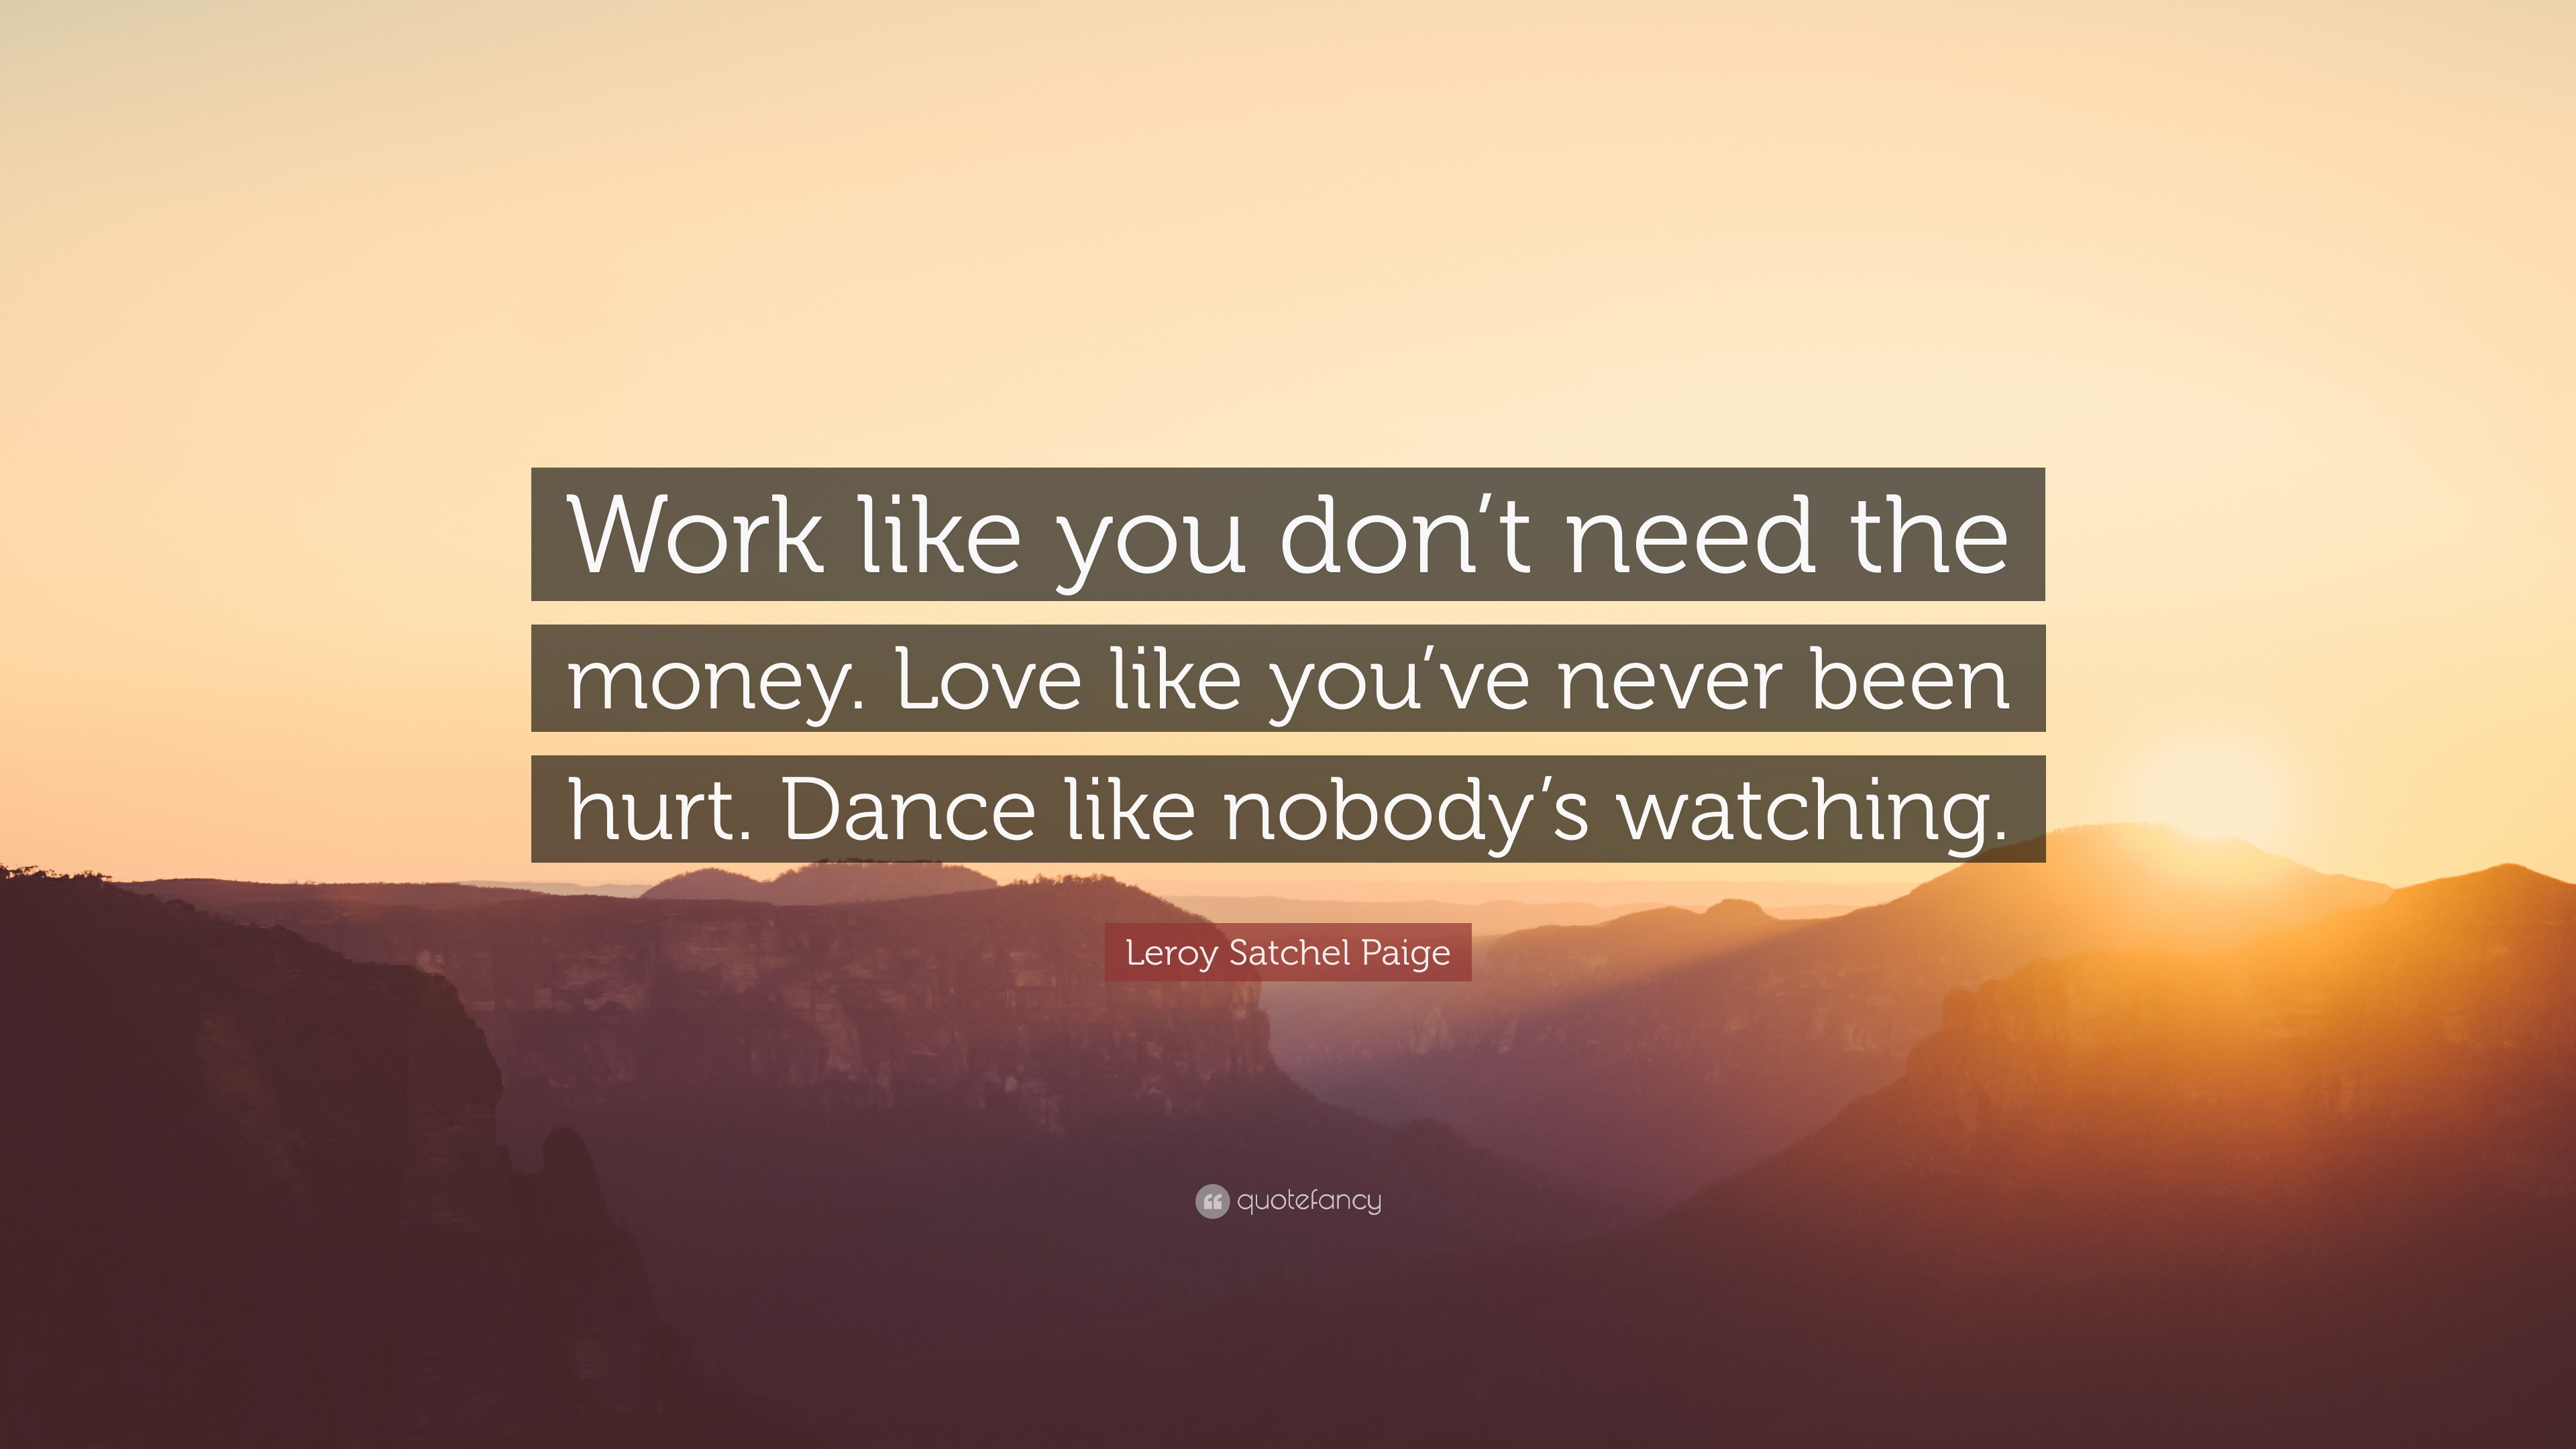 Leroy Satchel Paige Quote “Work like you don t need the money